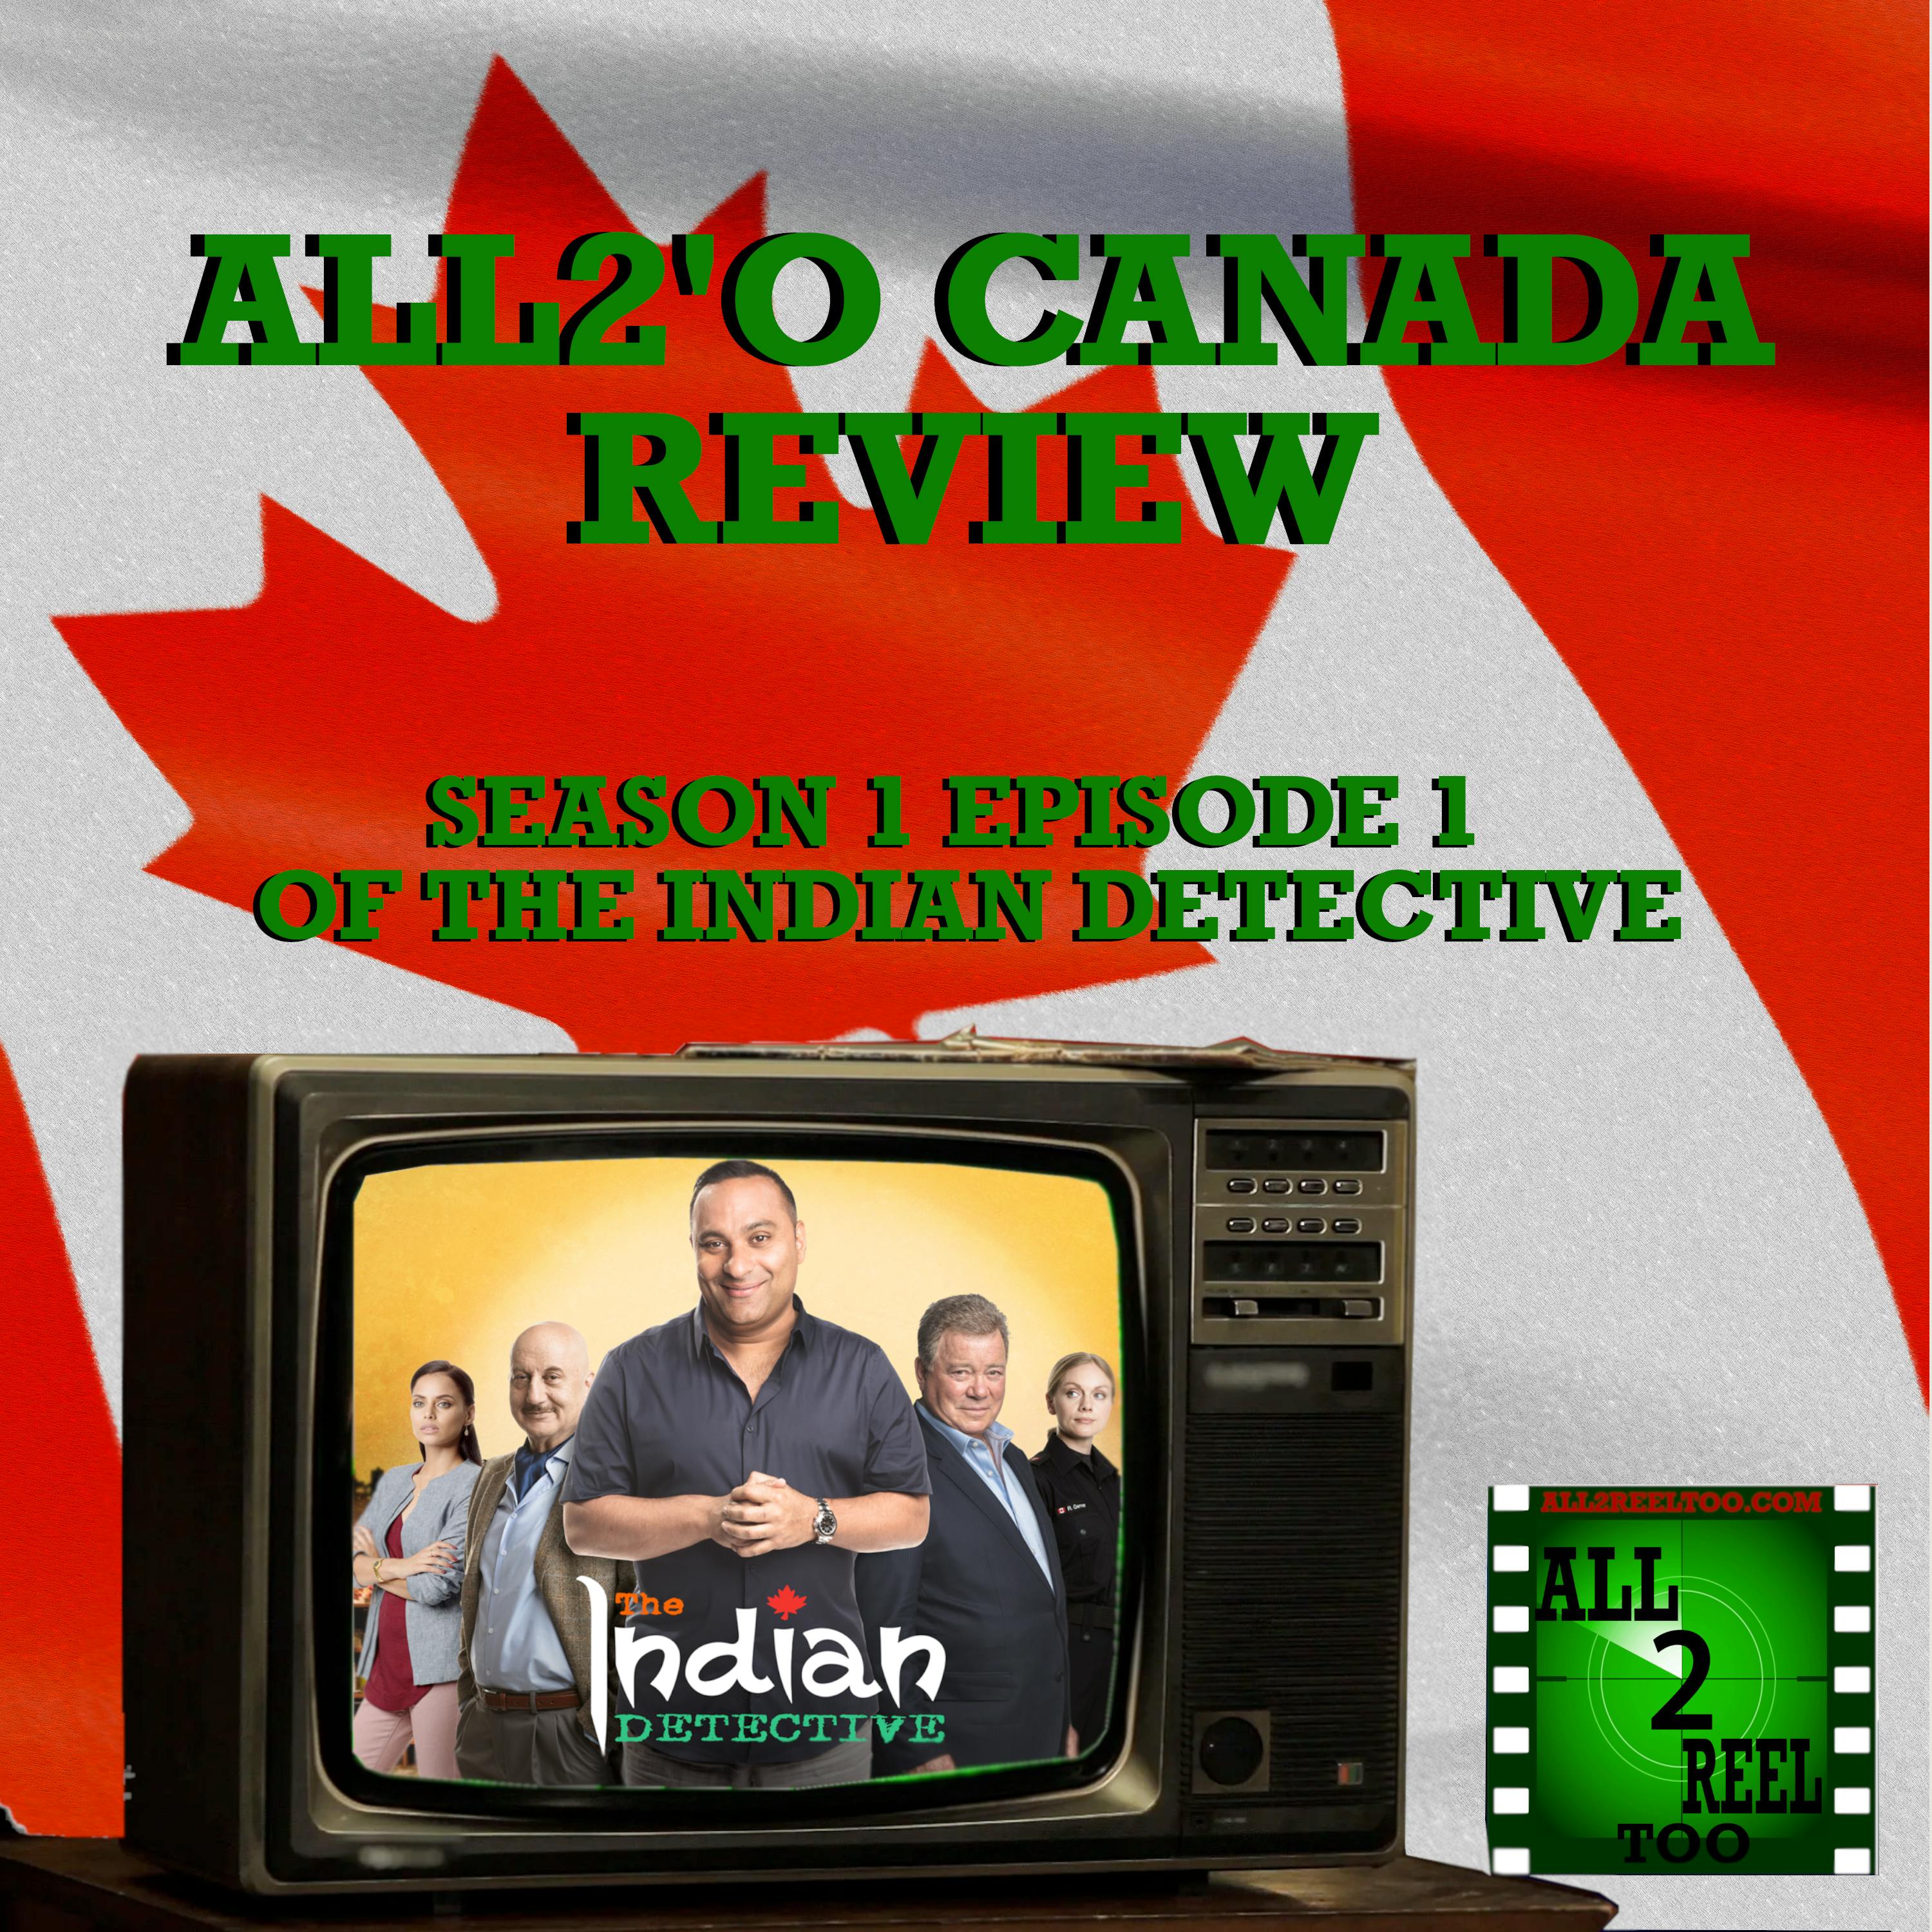 The Indian Detective (2017) S1EP1- All2'O CANADA Review